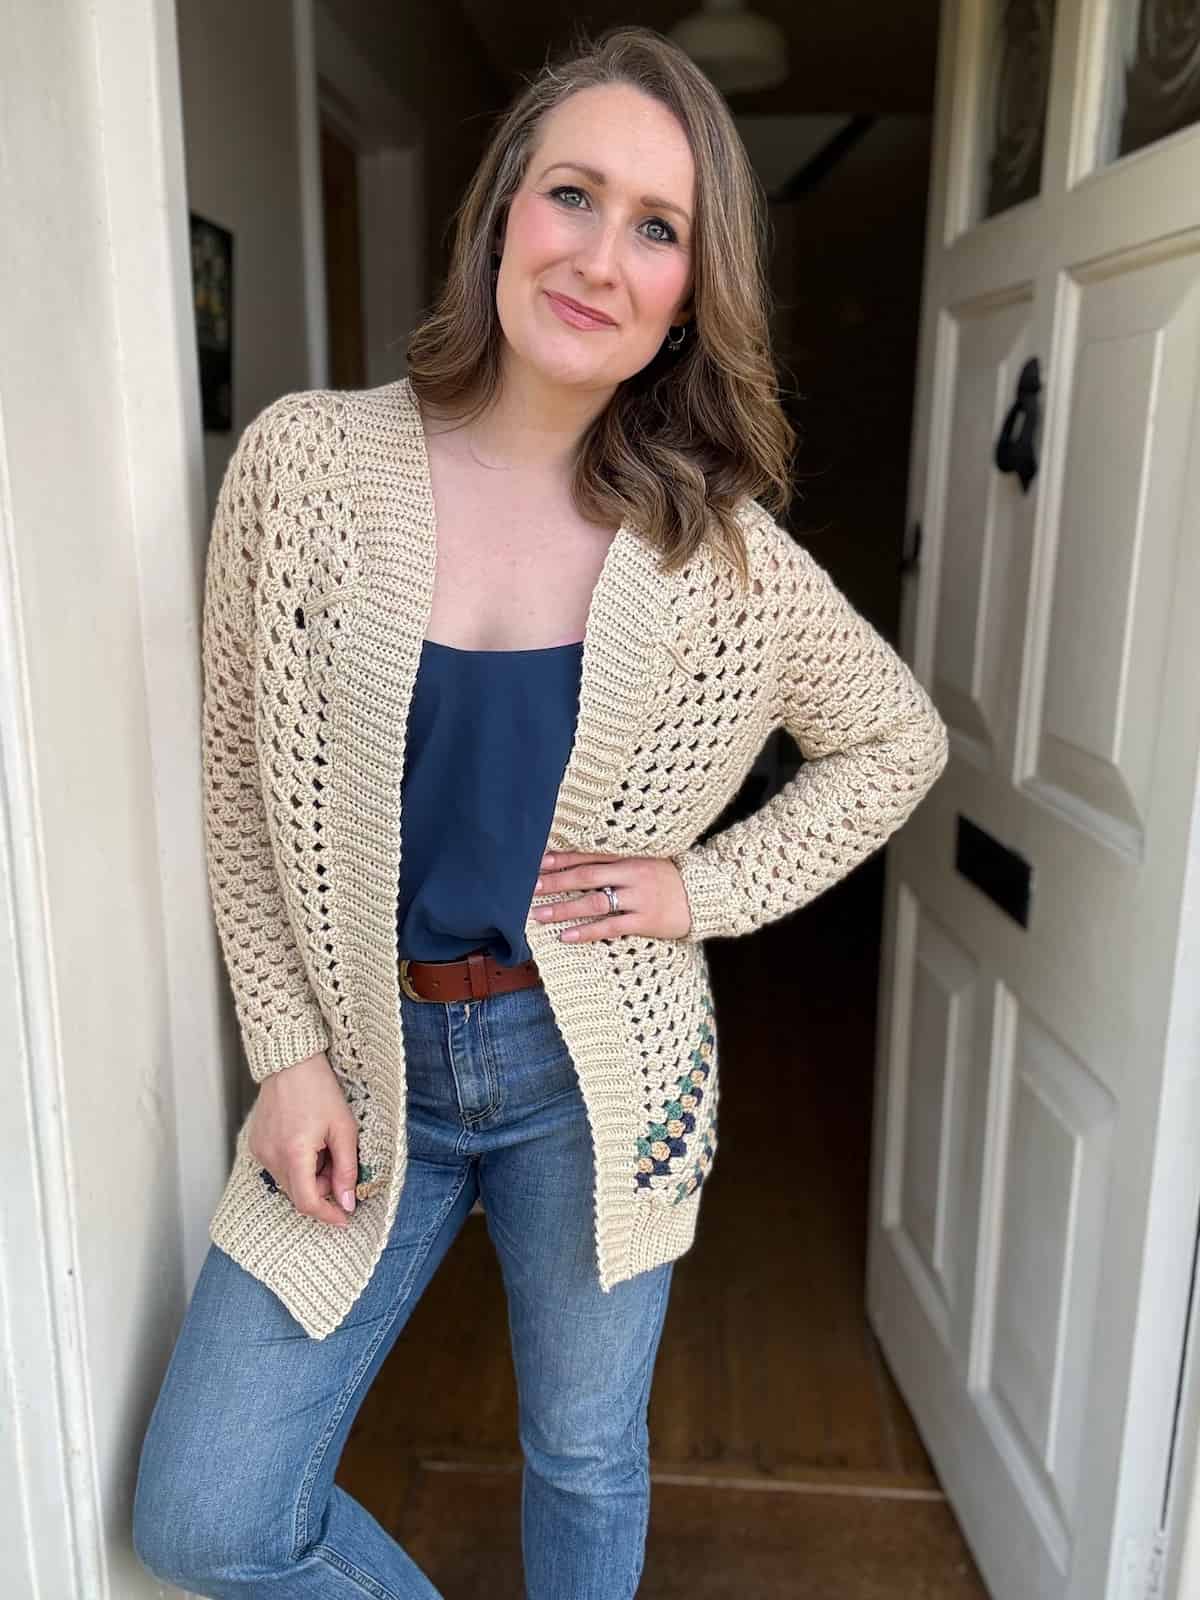 A woman in a beige crochet cardigan and blue top standing in a doorway.